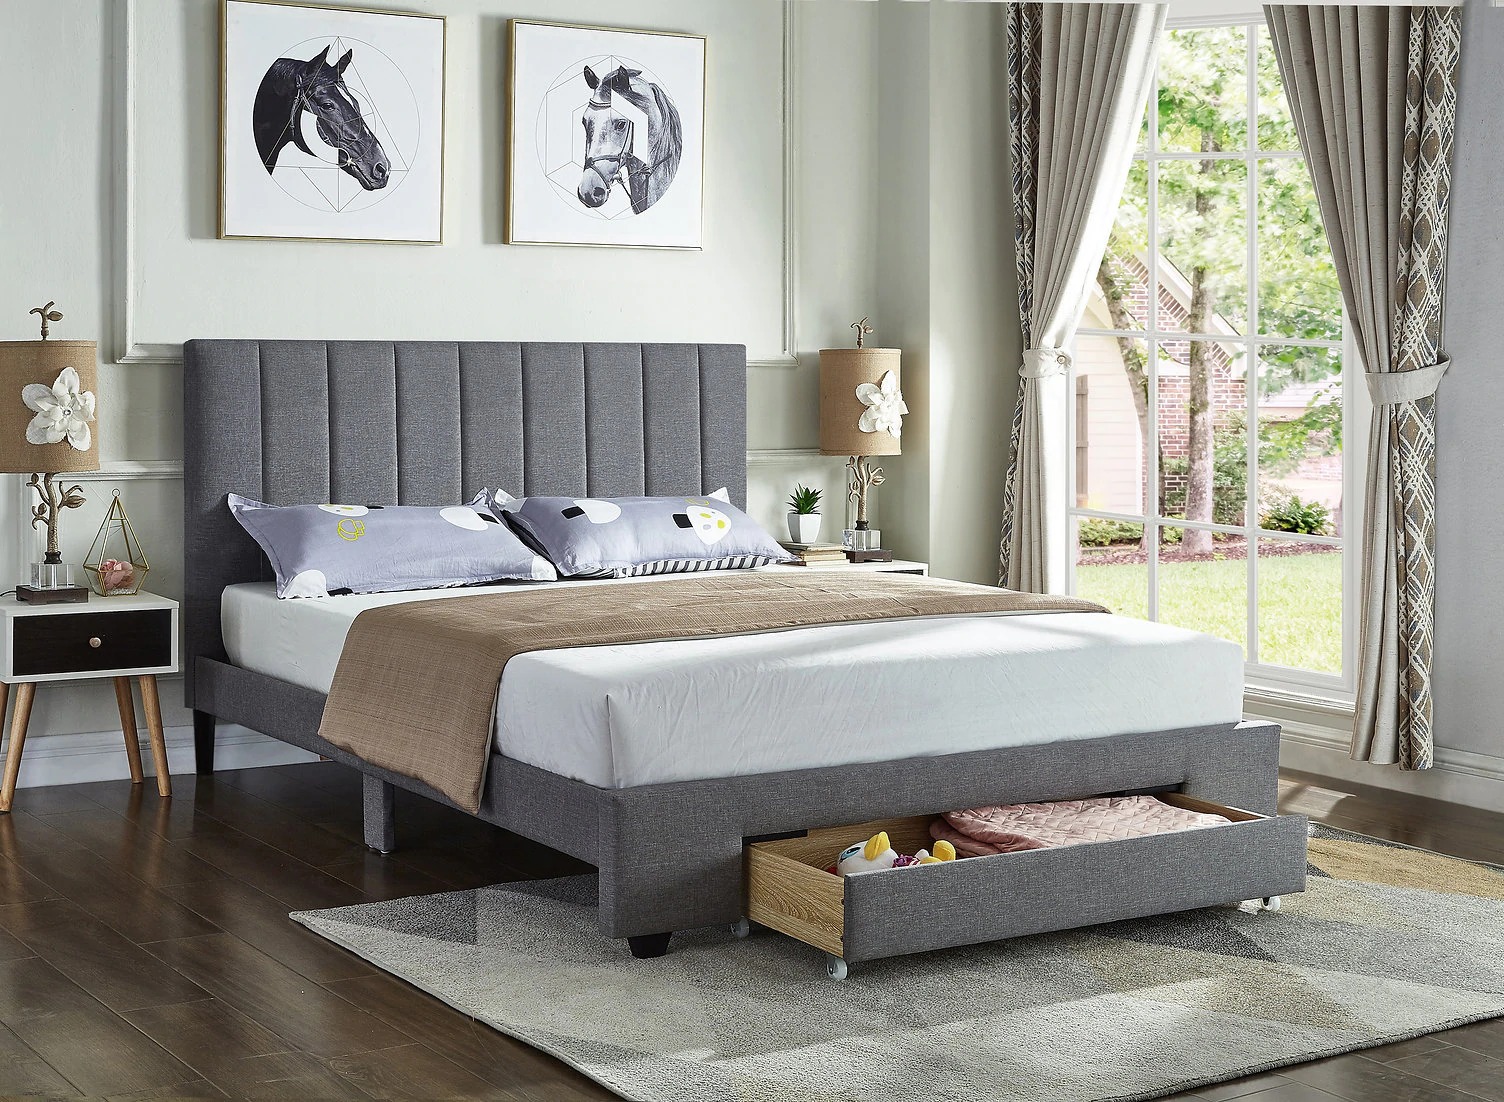 3 Myths about Storage Beds You Must Know